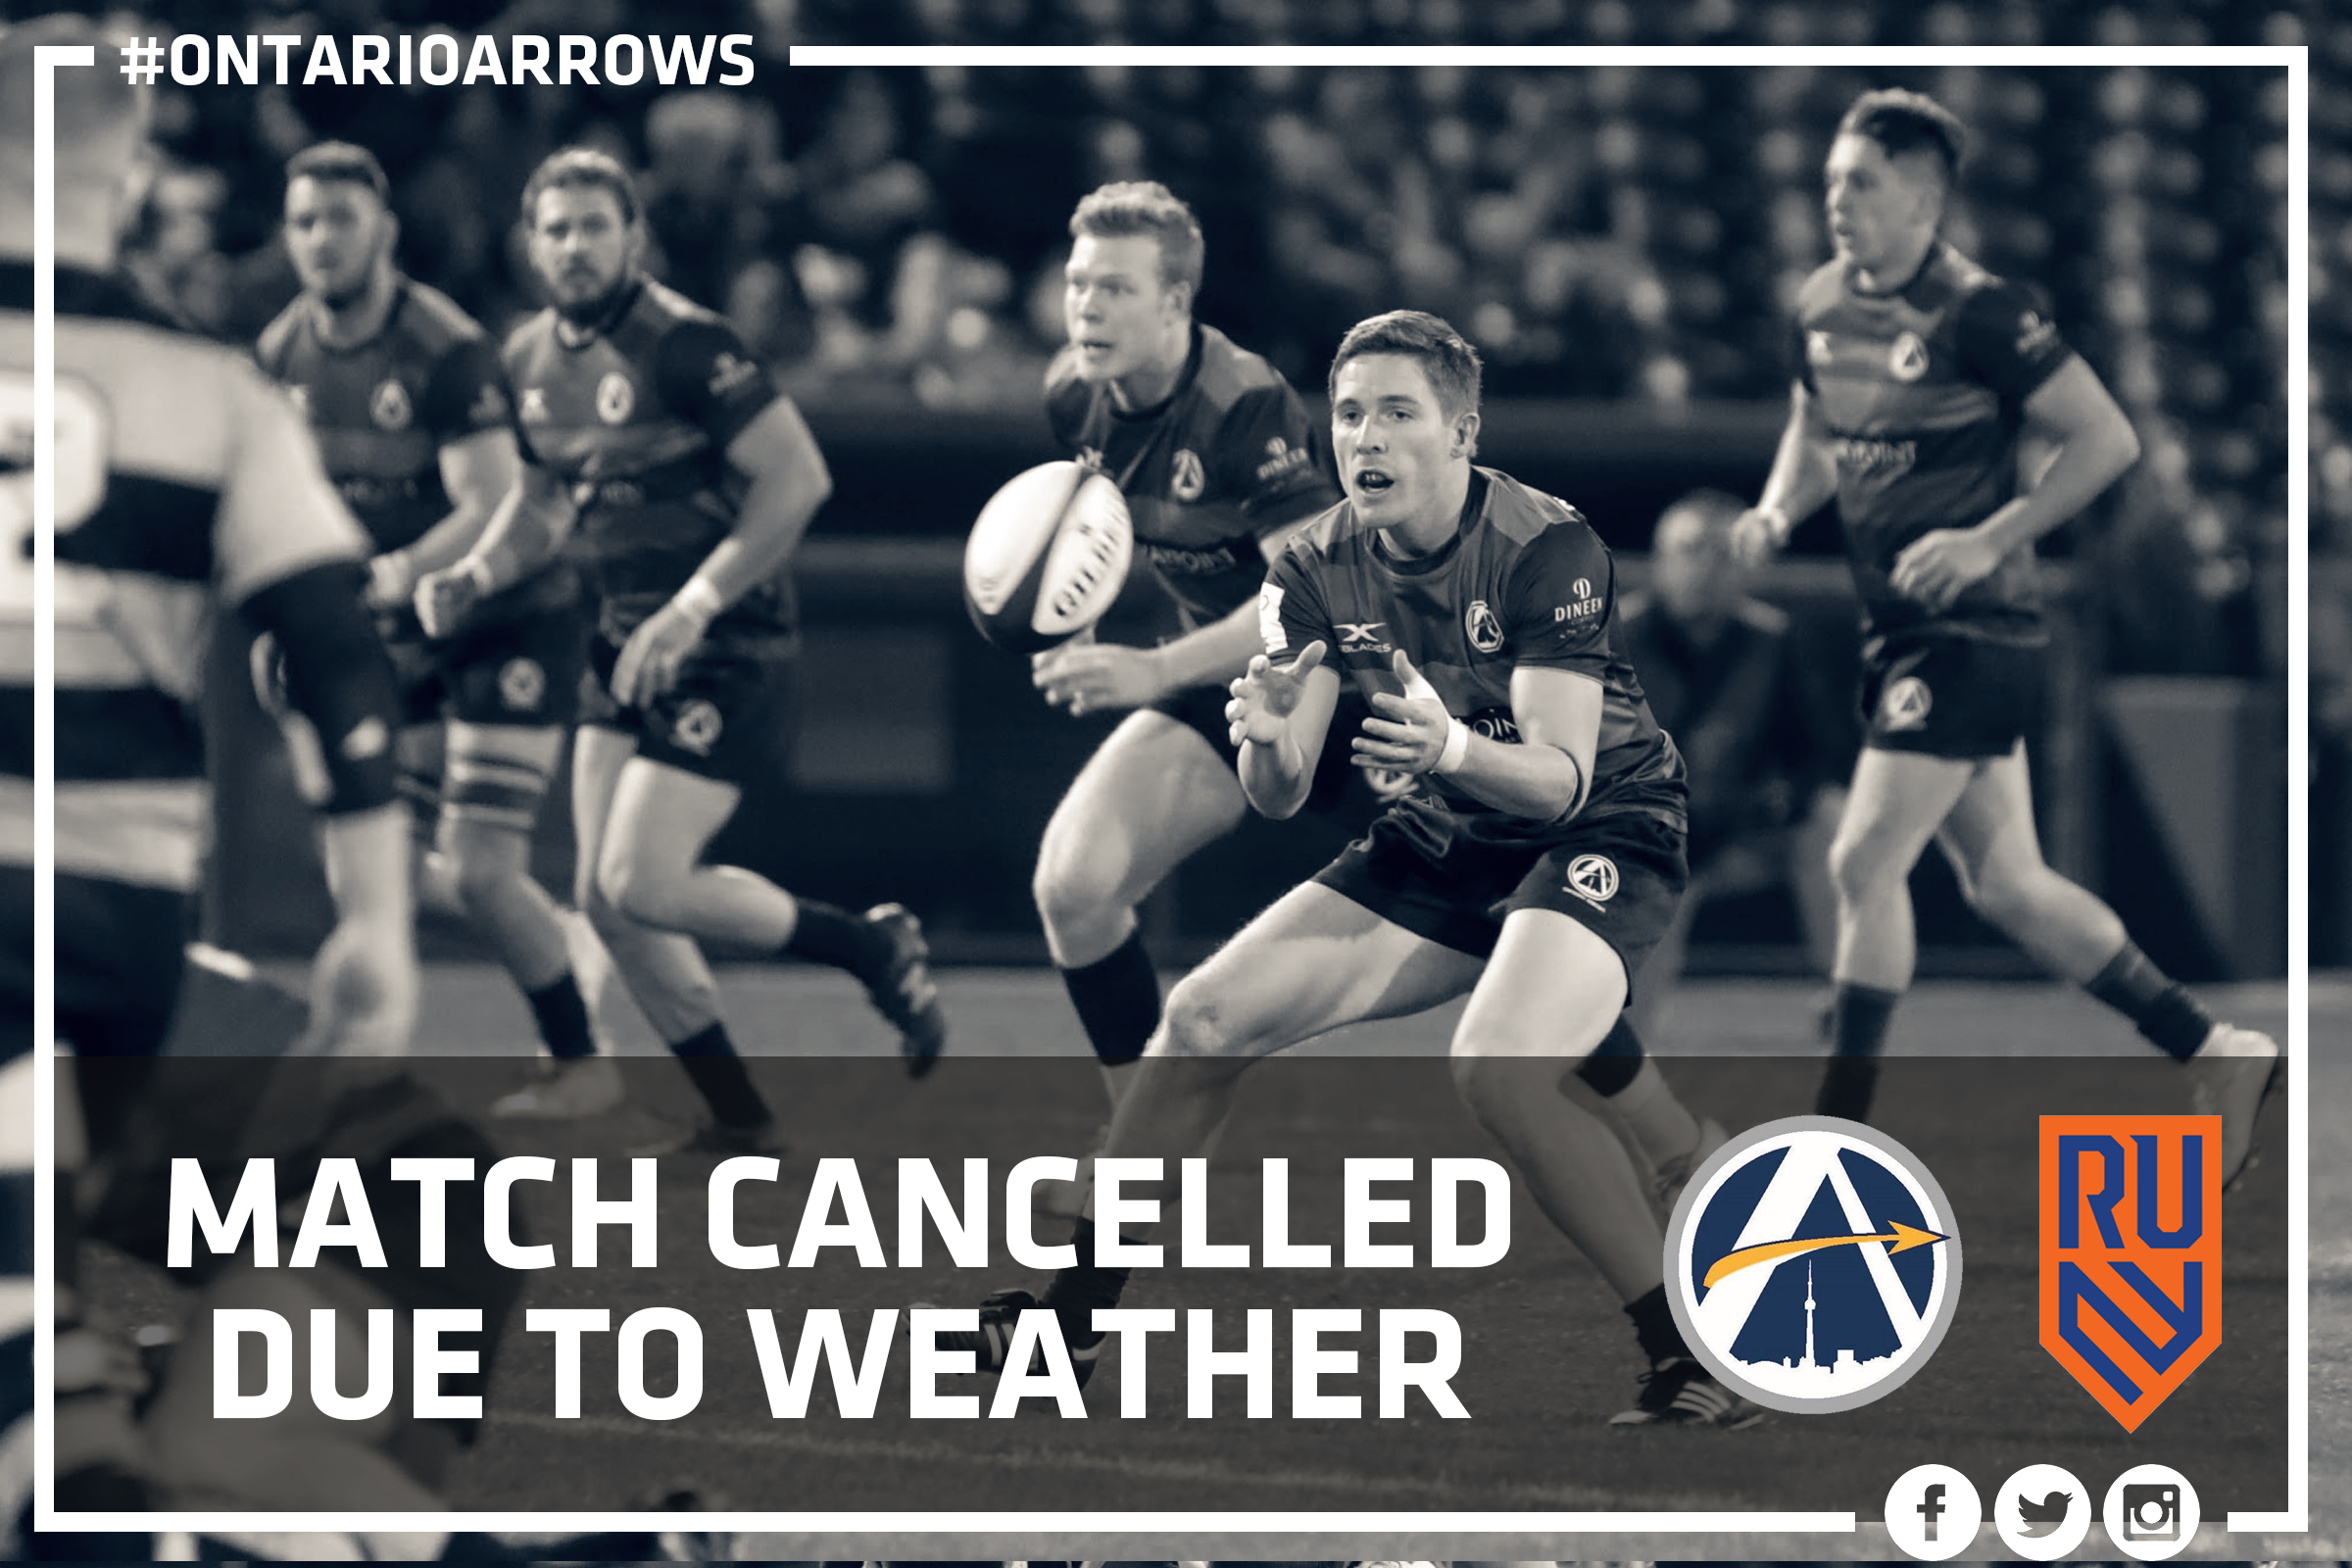 UPDATE: Today’s match vs. Rugby United New York CANCELLED